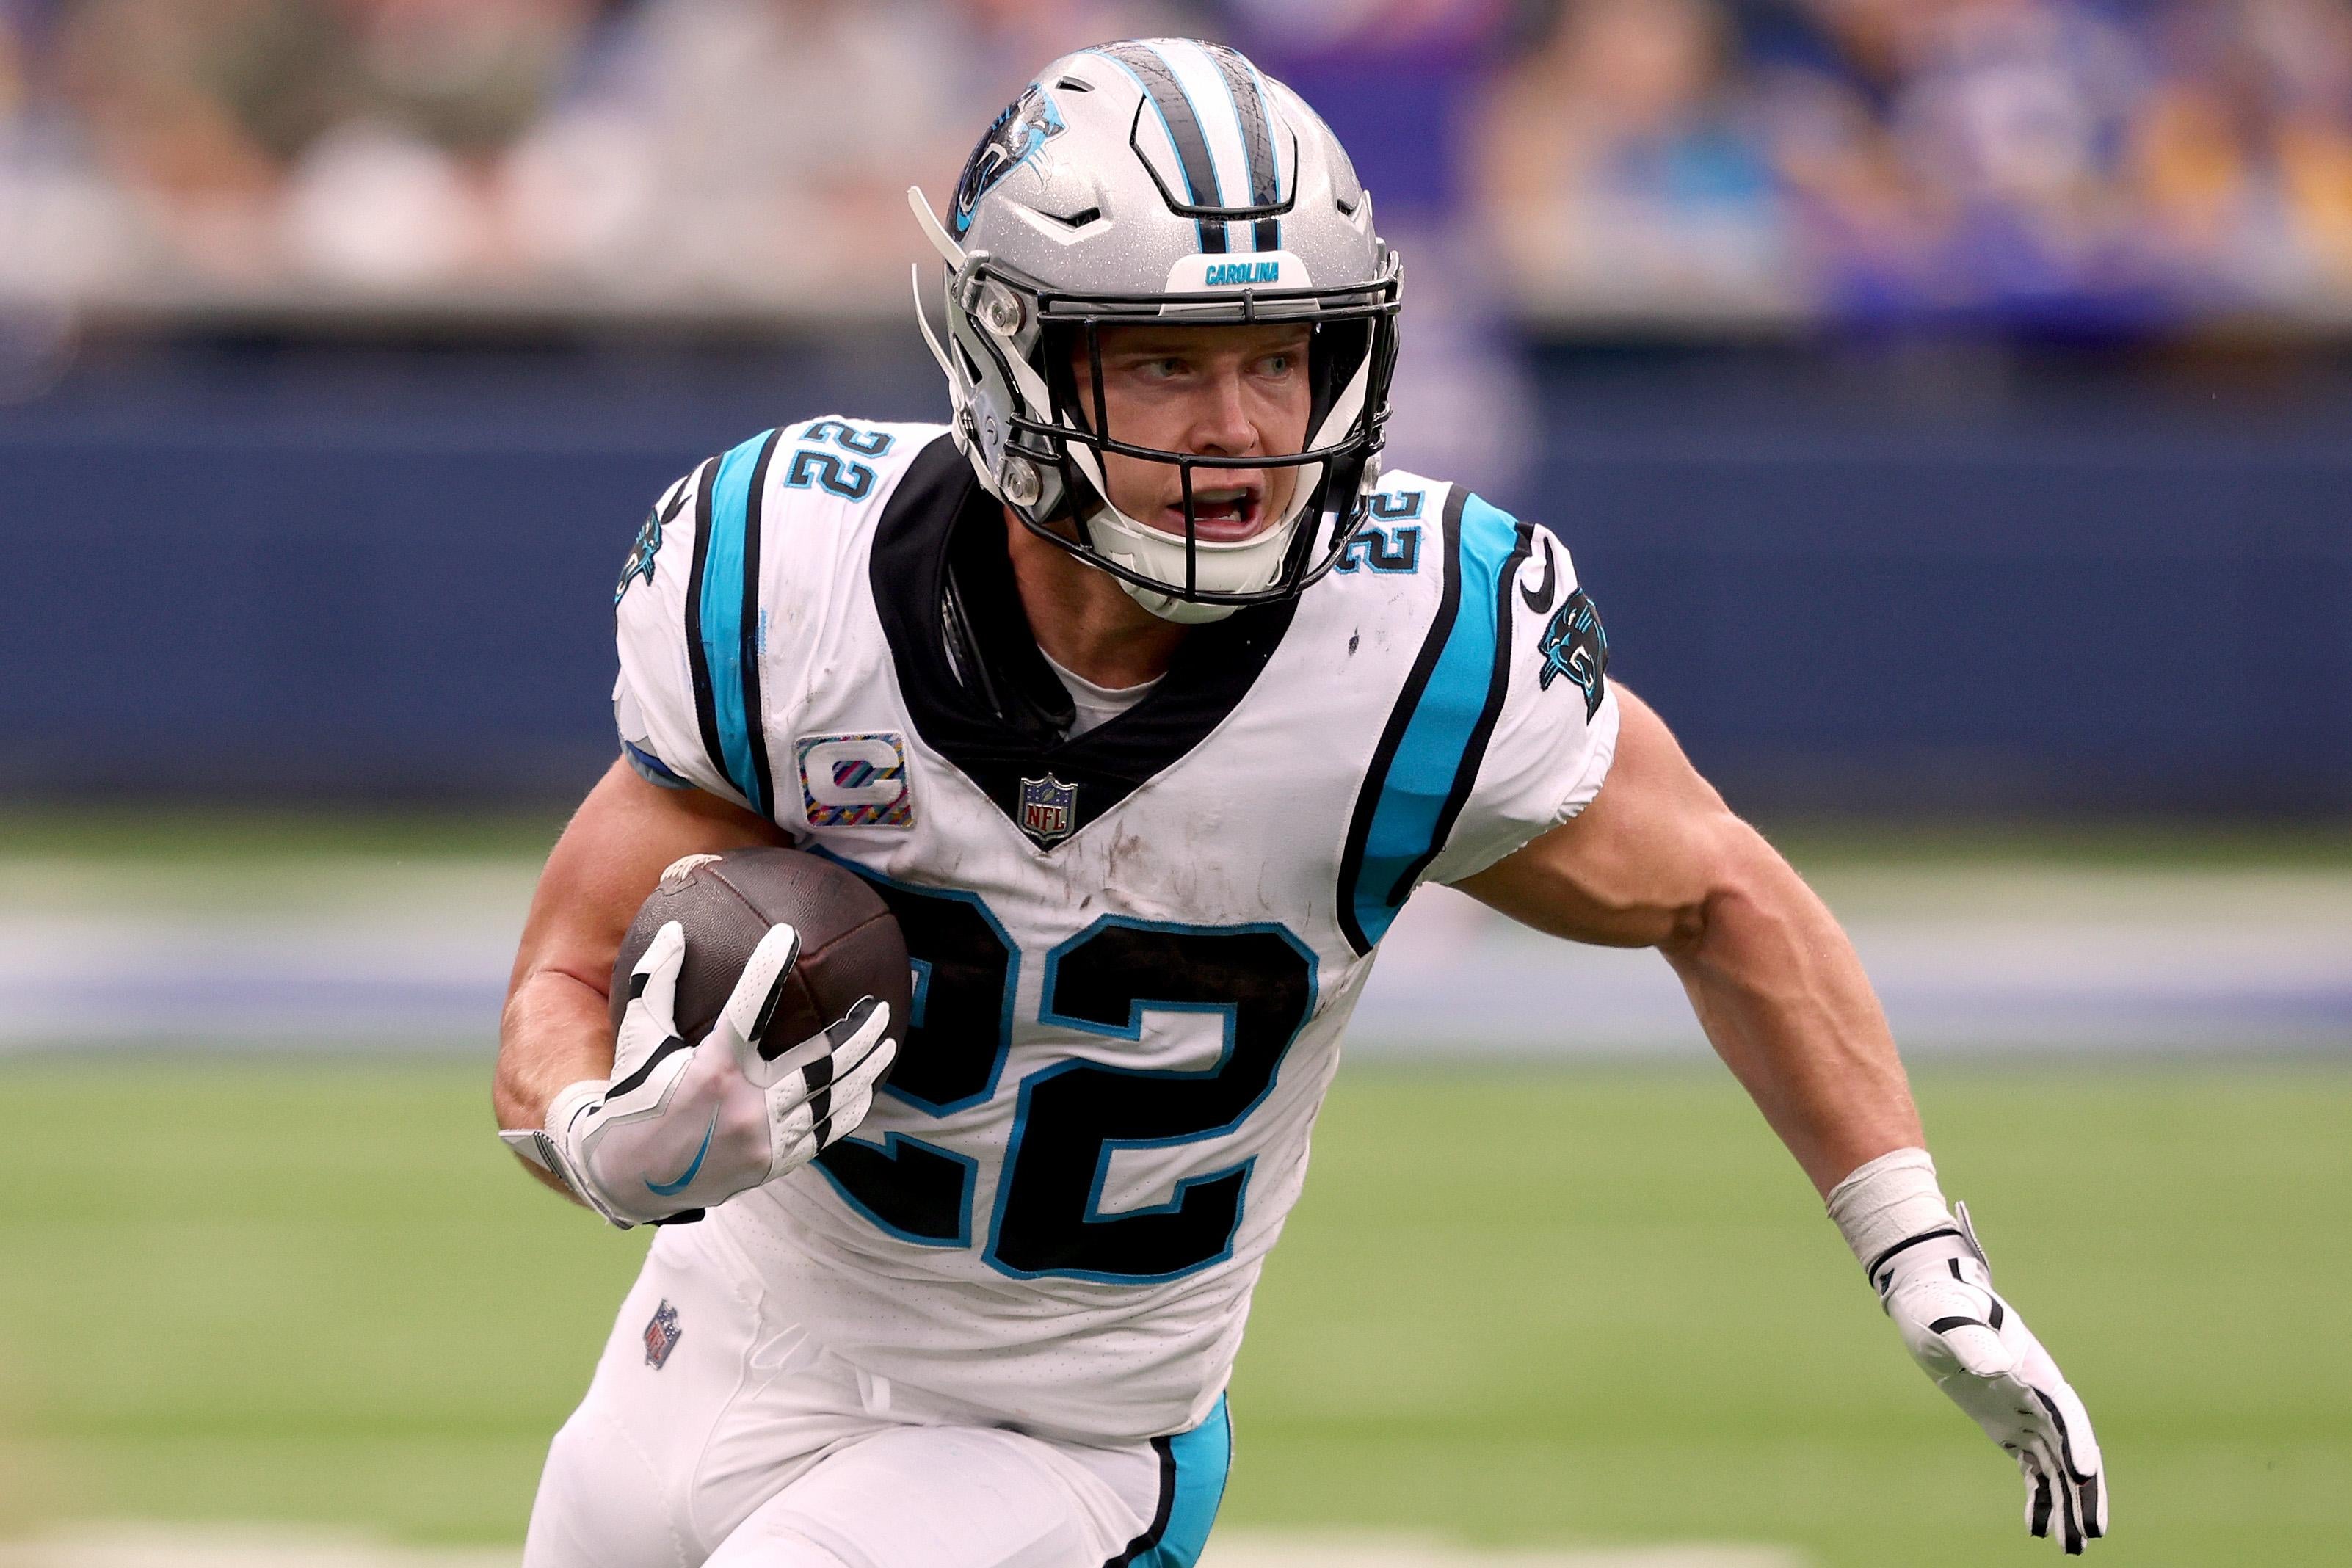 McCaffrey in his Panthers uniform on the field running with the ball tucked in his right arm